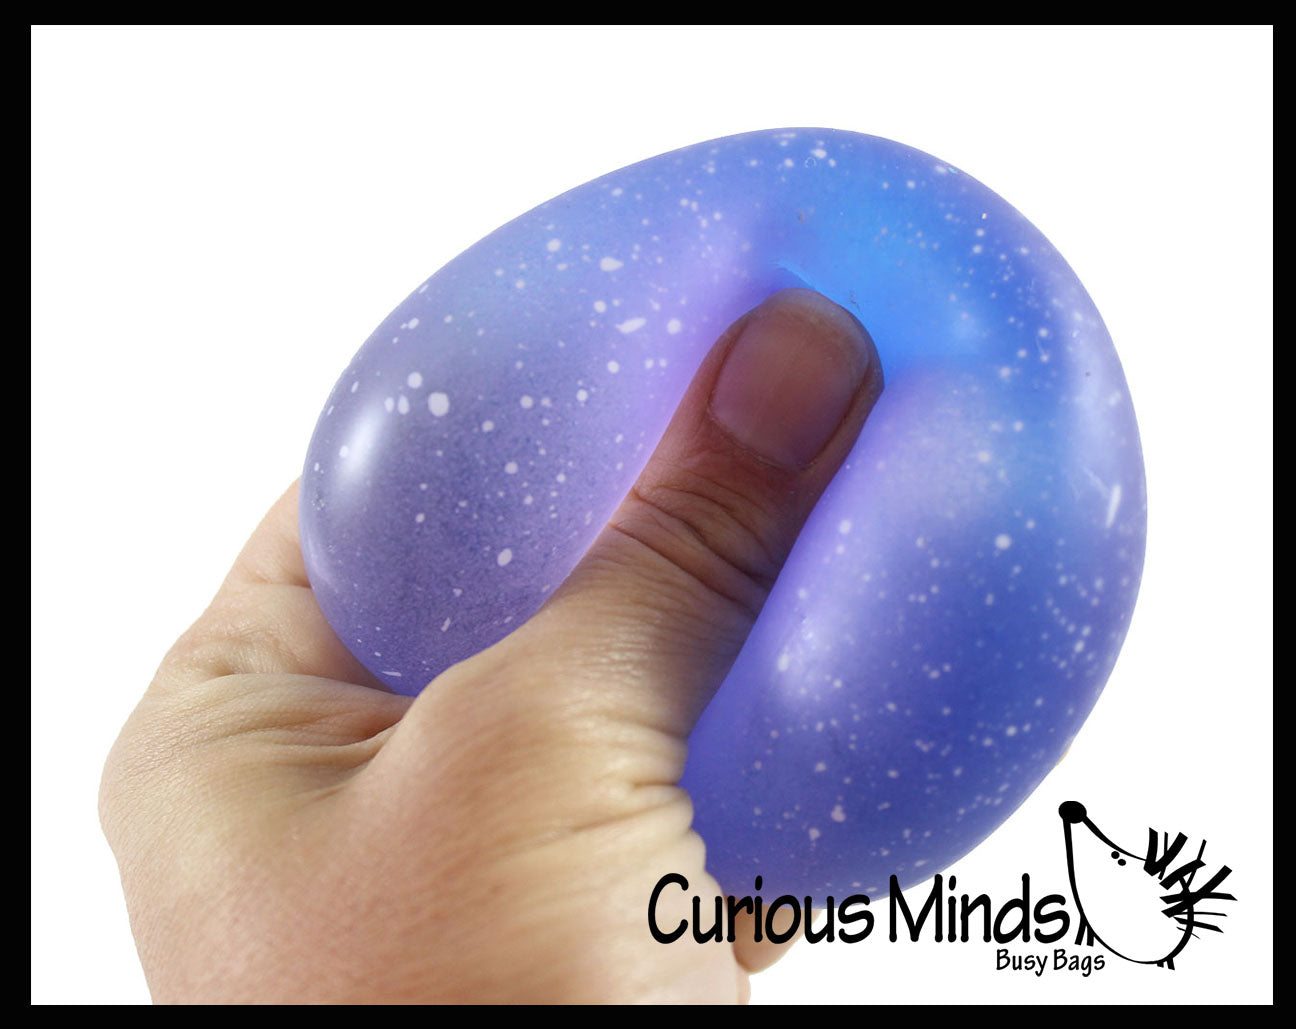 Galaxy Sugar Ball - Thick Glue/Gel Syrup Molasses Stretch Ball - Ultra Squishy and Moldable Slow Rise Relaxing Sensory Fidget Stress Toy